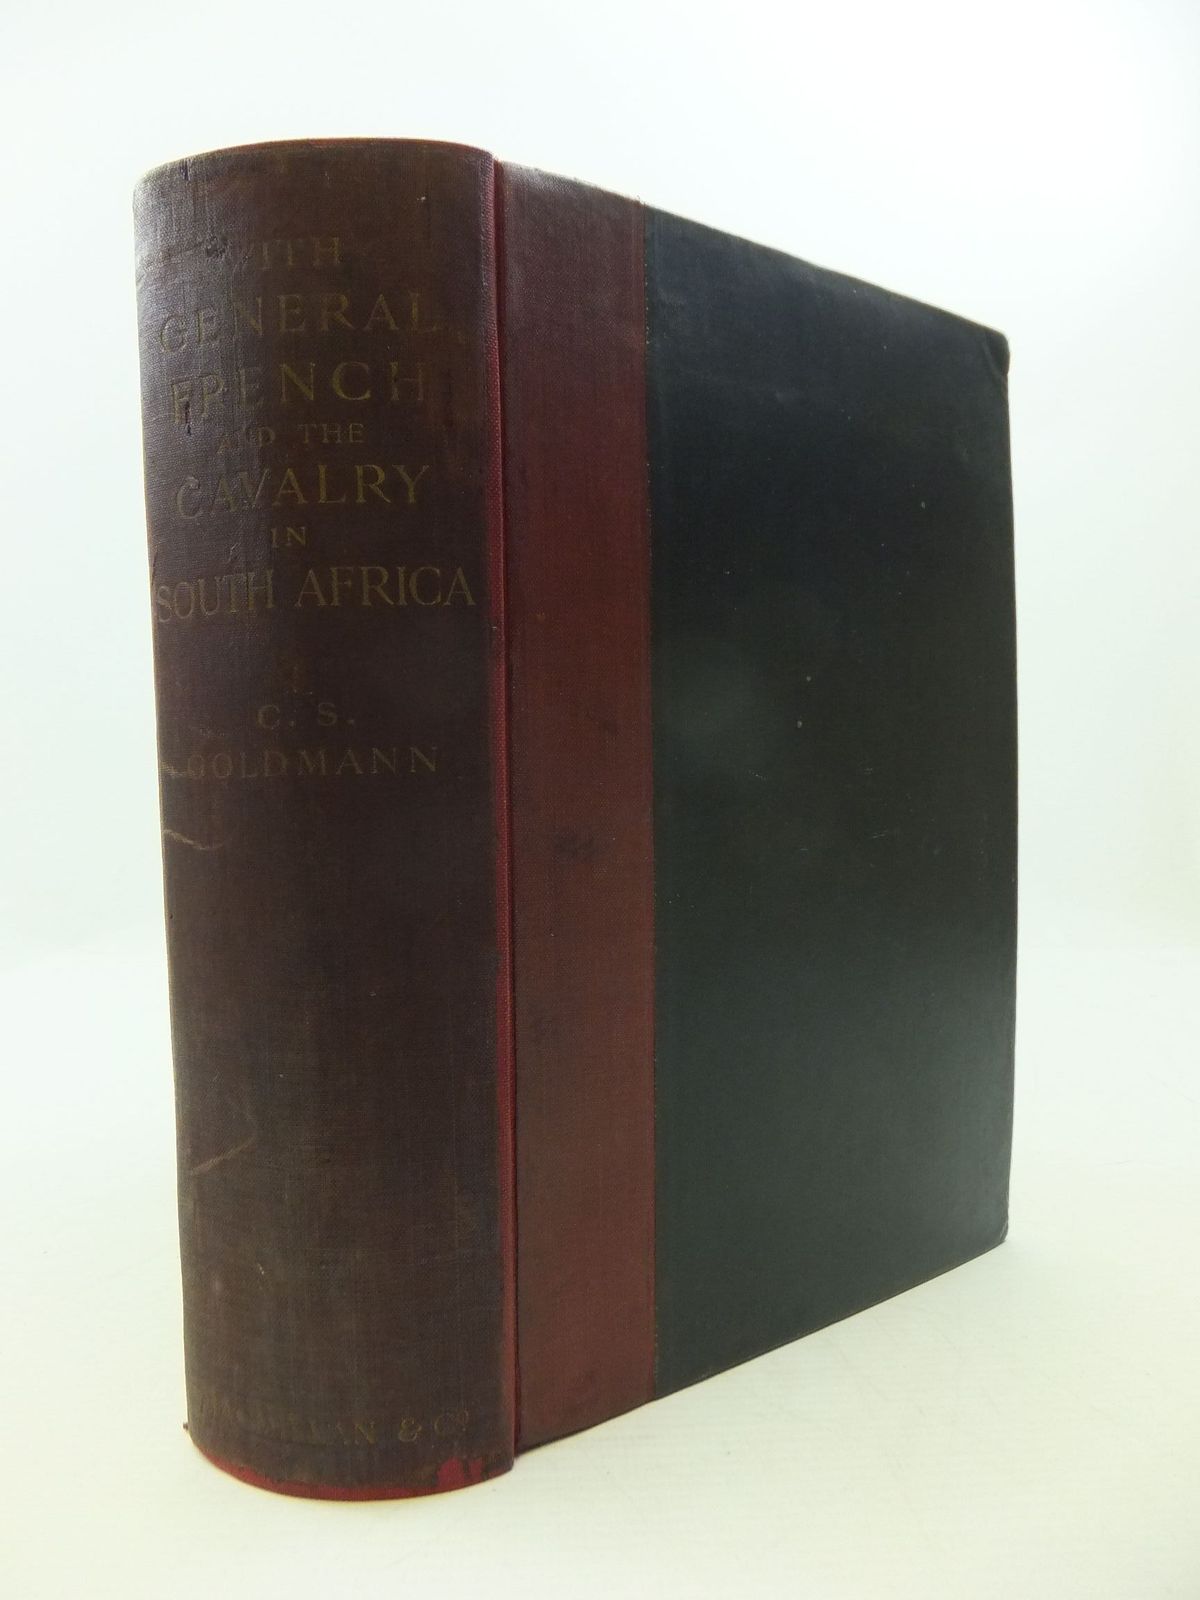 Photo of WITH GENERAL FRENCH AND THE CAVALRY IN SOUTH AFRICA written by Goldmann, Charles Sydney published by Macmillan & Co. Ltd. (STOCK CODE: 2111576)  for sale by Stella & Rose's Books